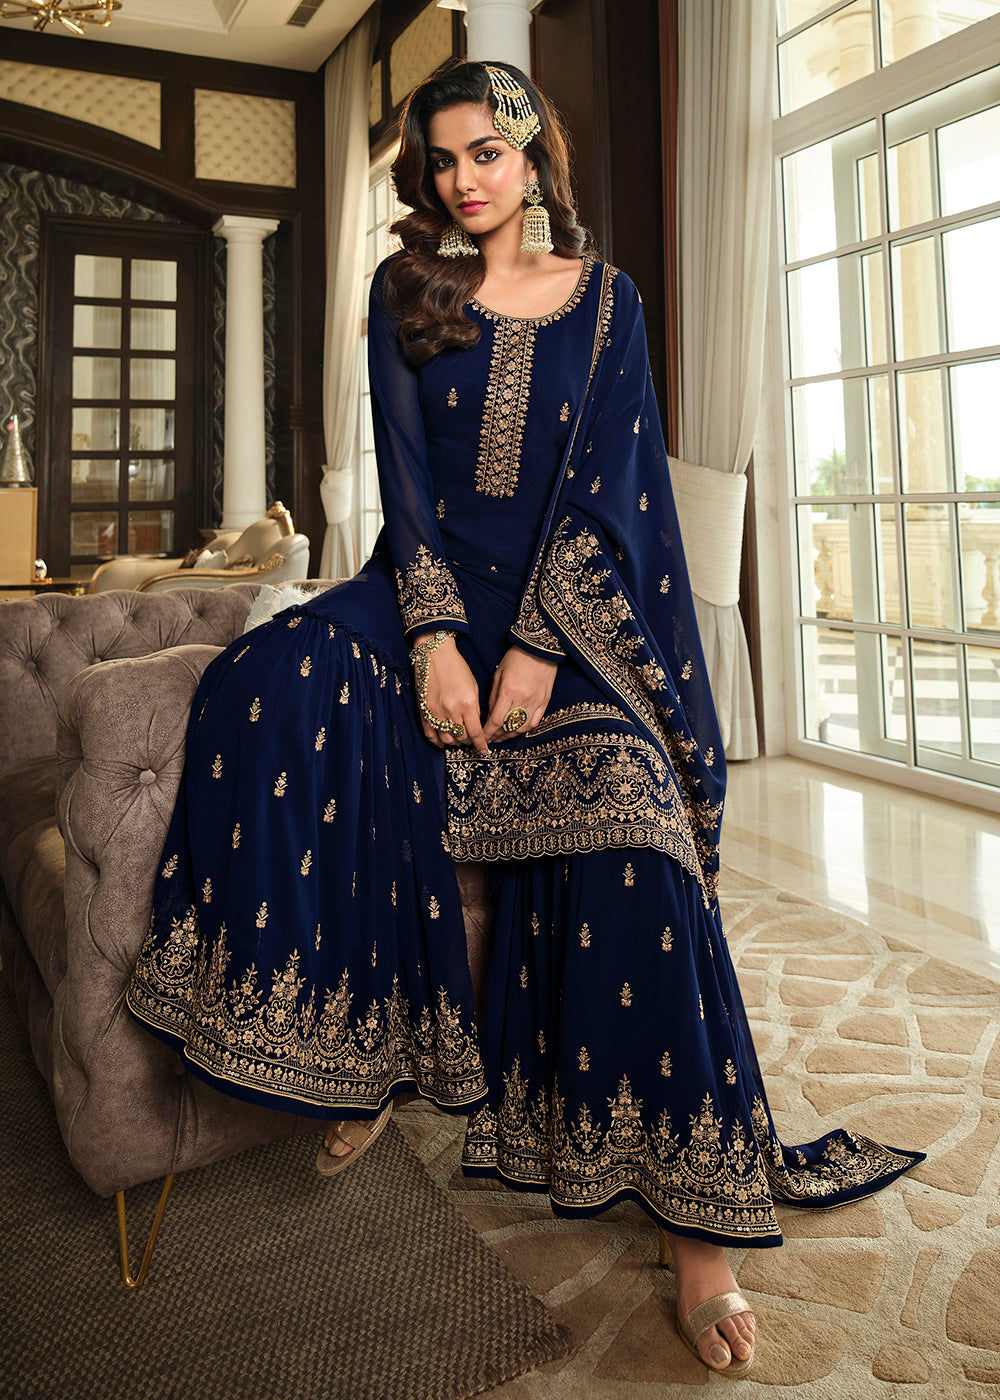 Shop Now Lovely Blue Embroidered Georgette Pakistani Gharara Suit Online at Empress Clothing in USA, UK, Canada, Germany & Worldwide.